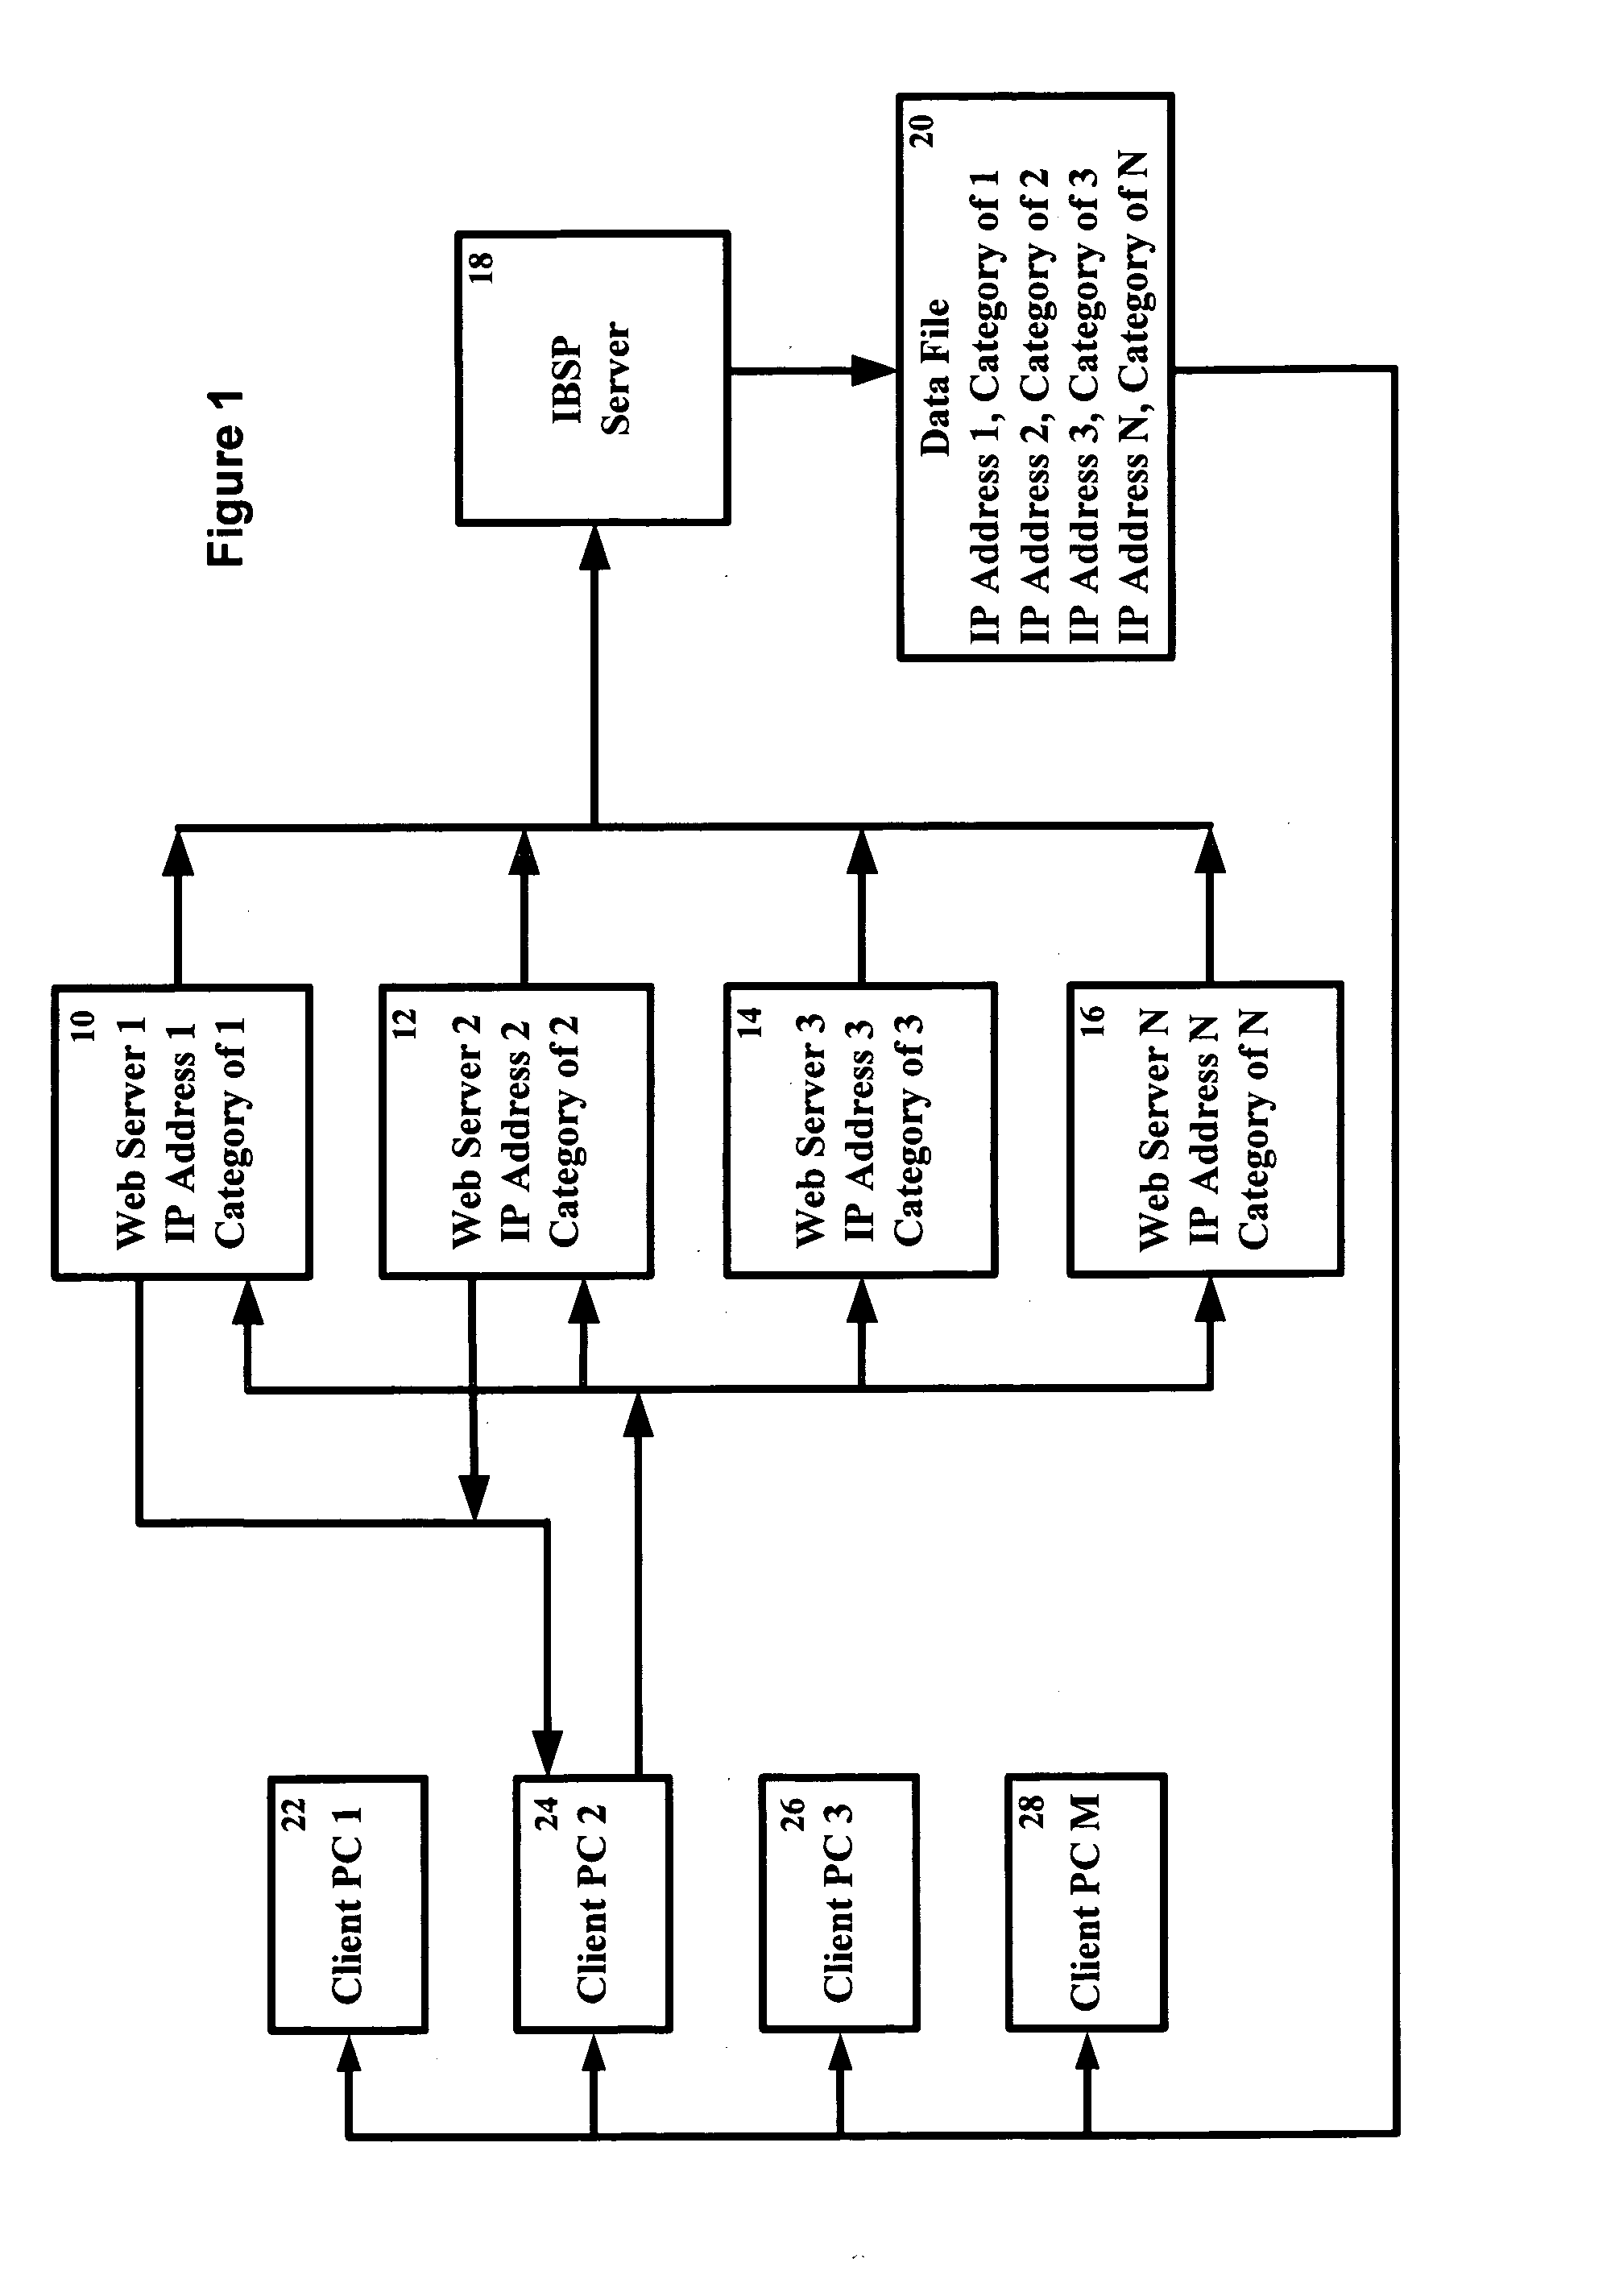 System and method for internet broadcast searching